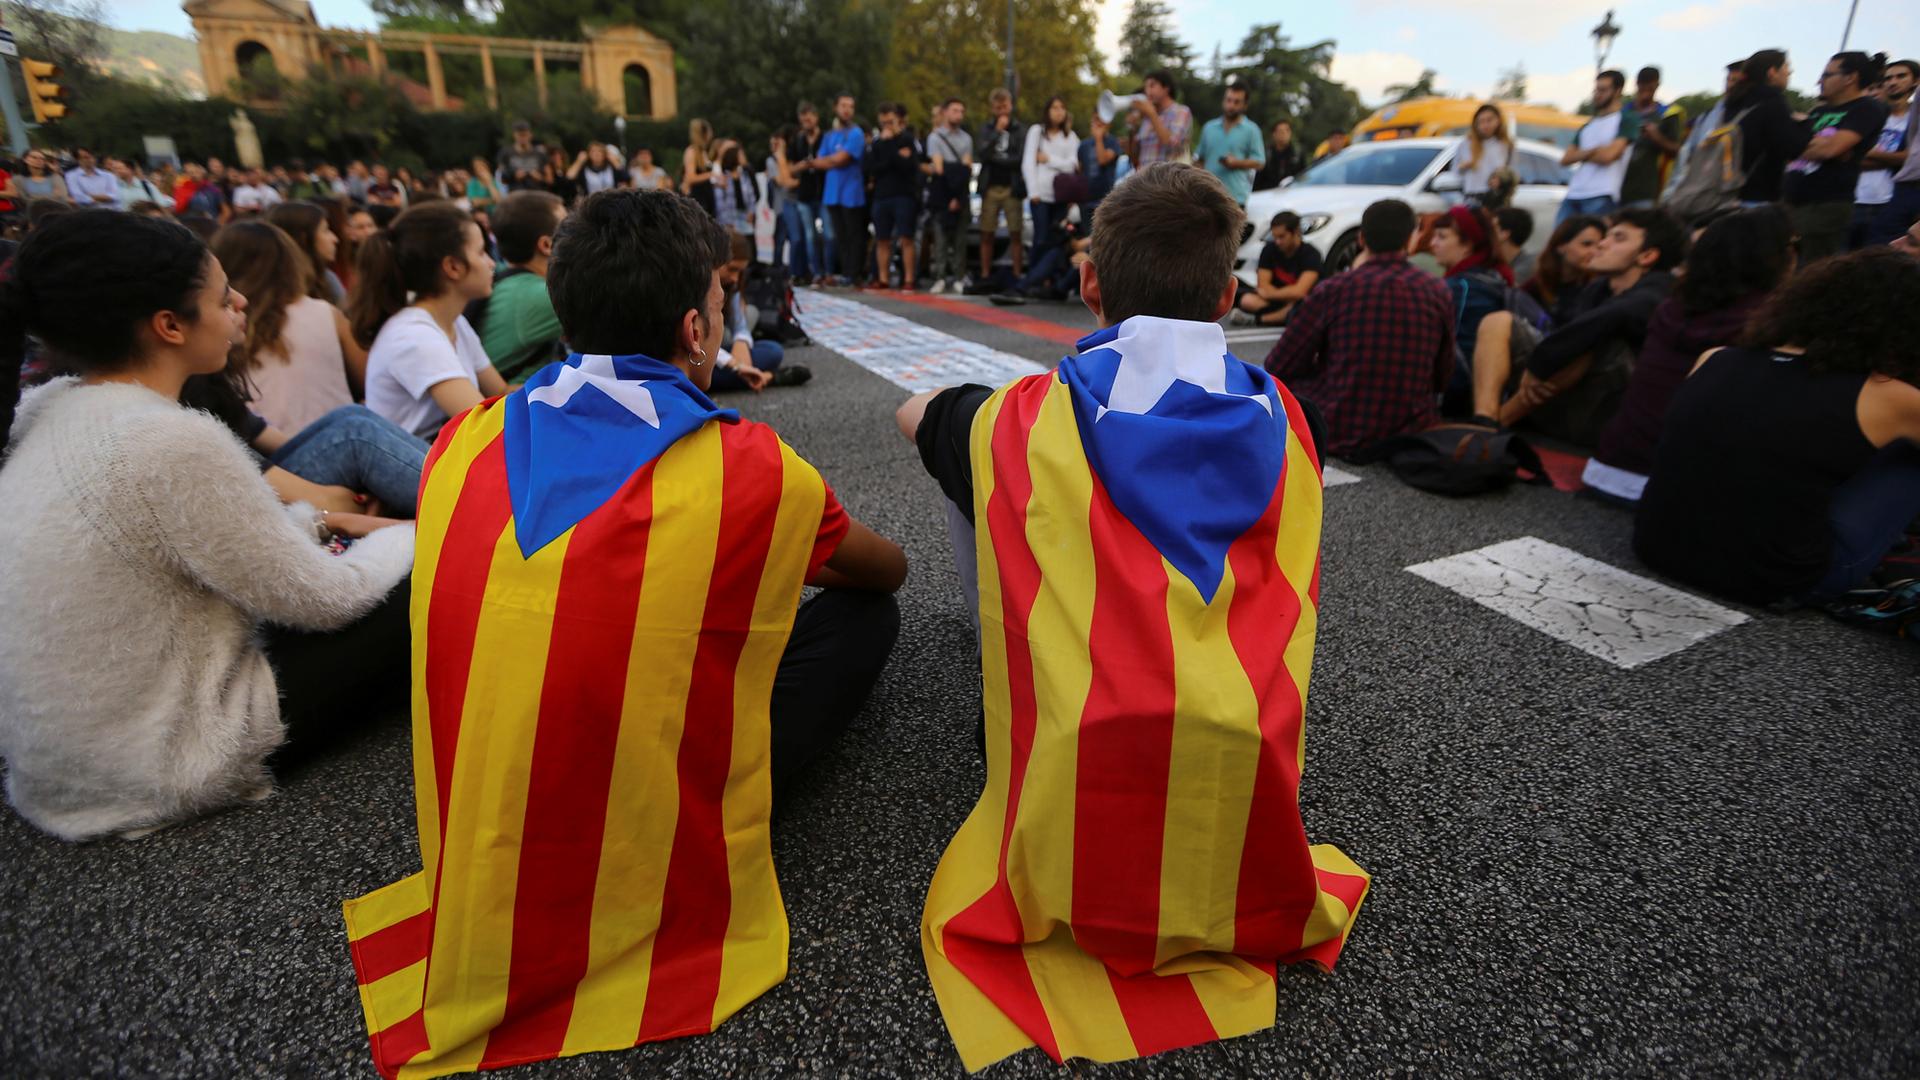 Students wear Catalan flags as they block a street during a protest in Barcelona.